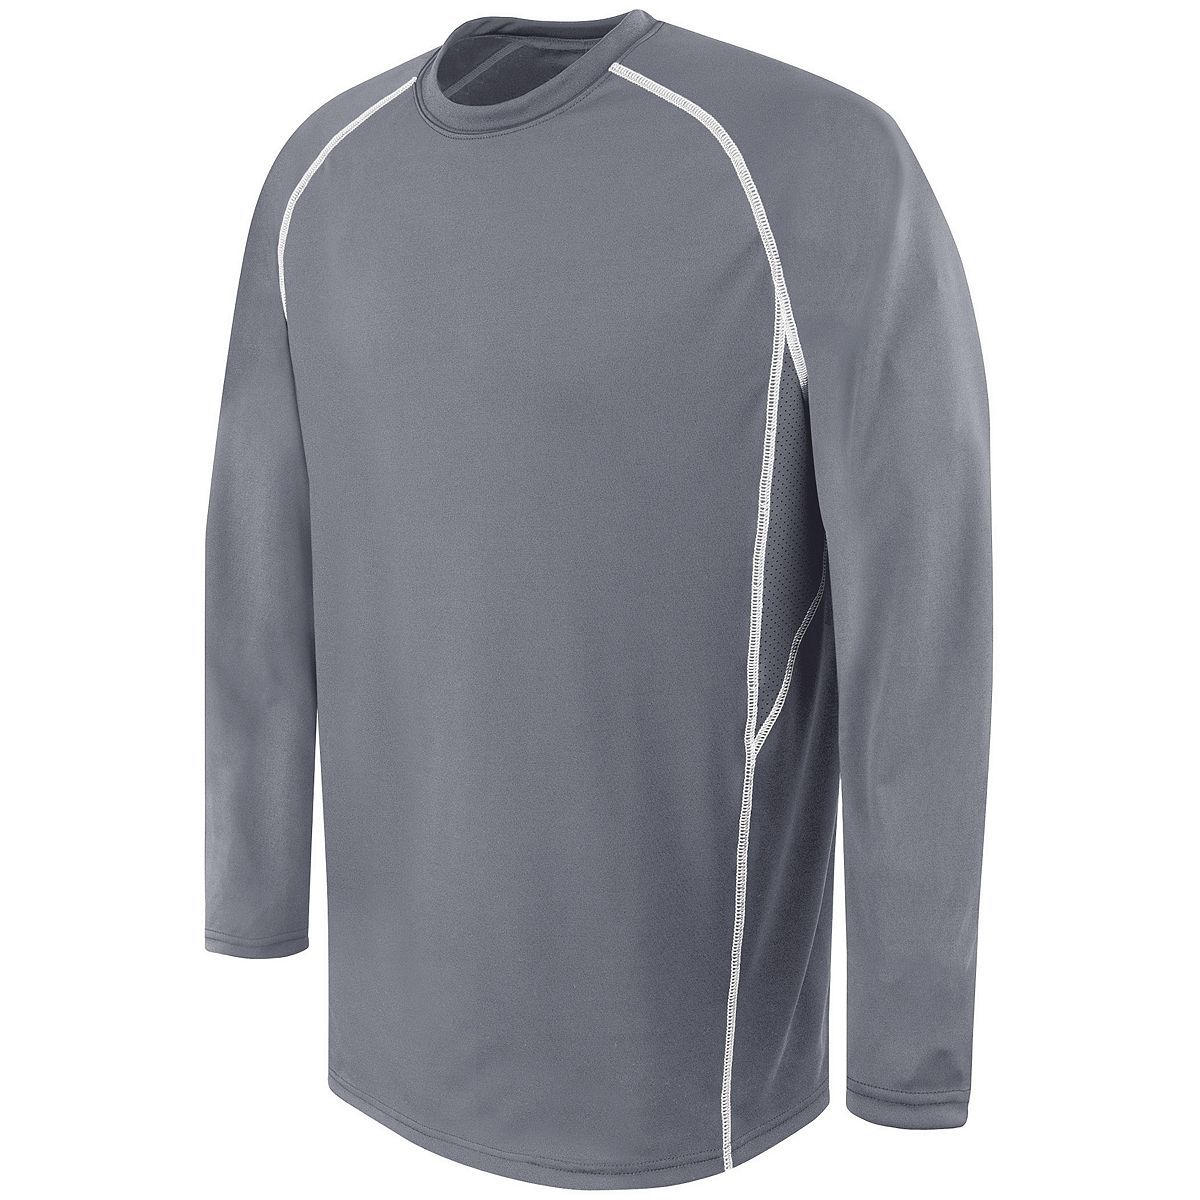 High 5 Adult Long Sleeve Evolution Top in Graphite/Graphite/White  -Part of the Adult, High5-Products, Shirts product lines at KanaleyCreations.com